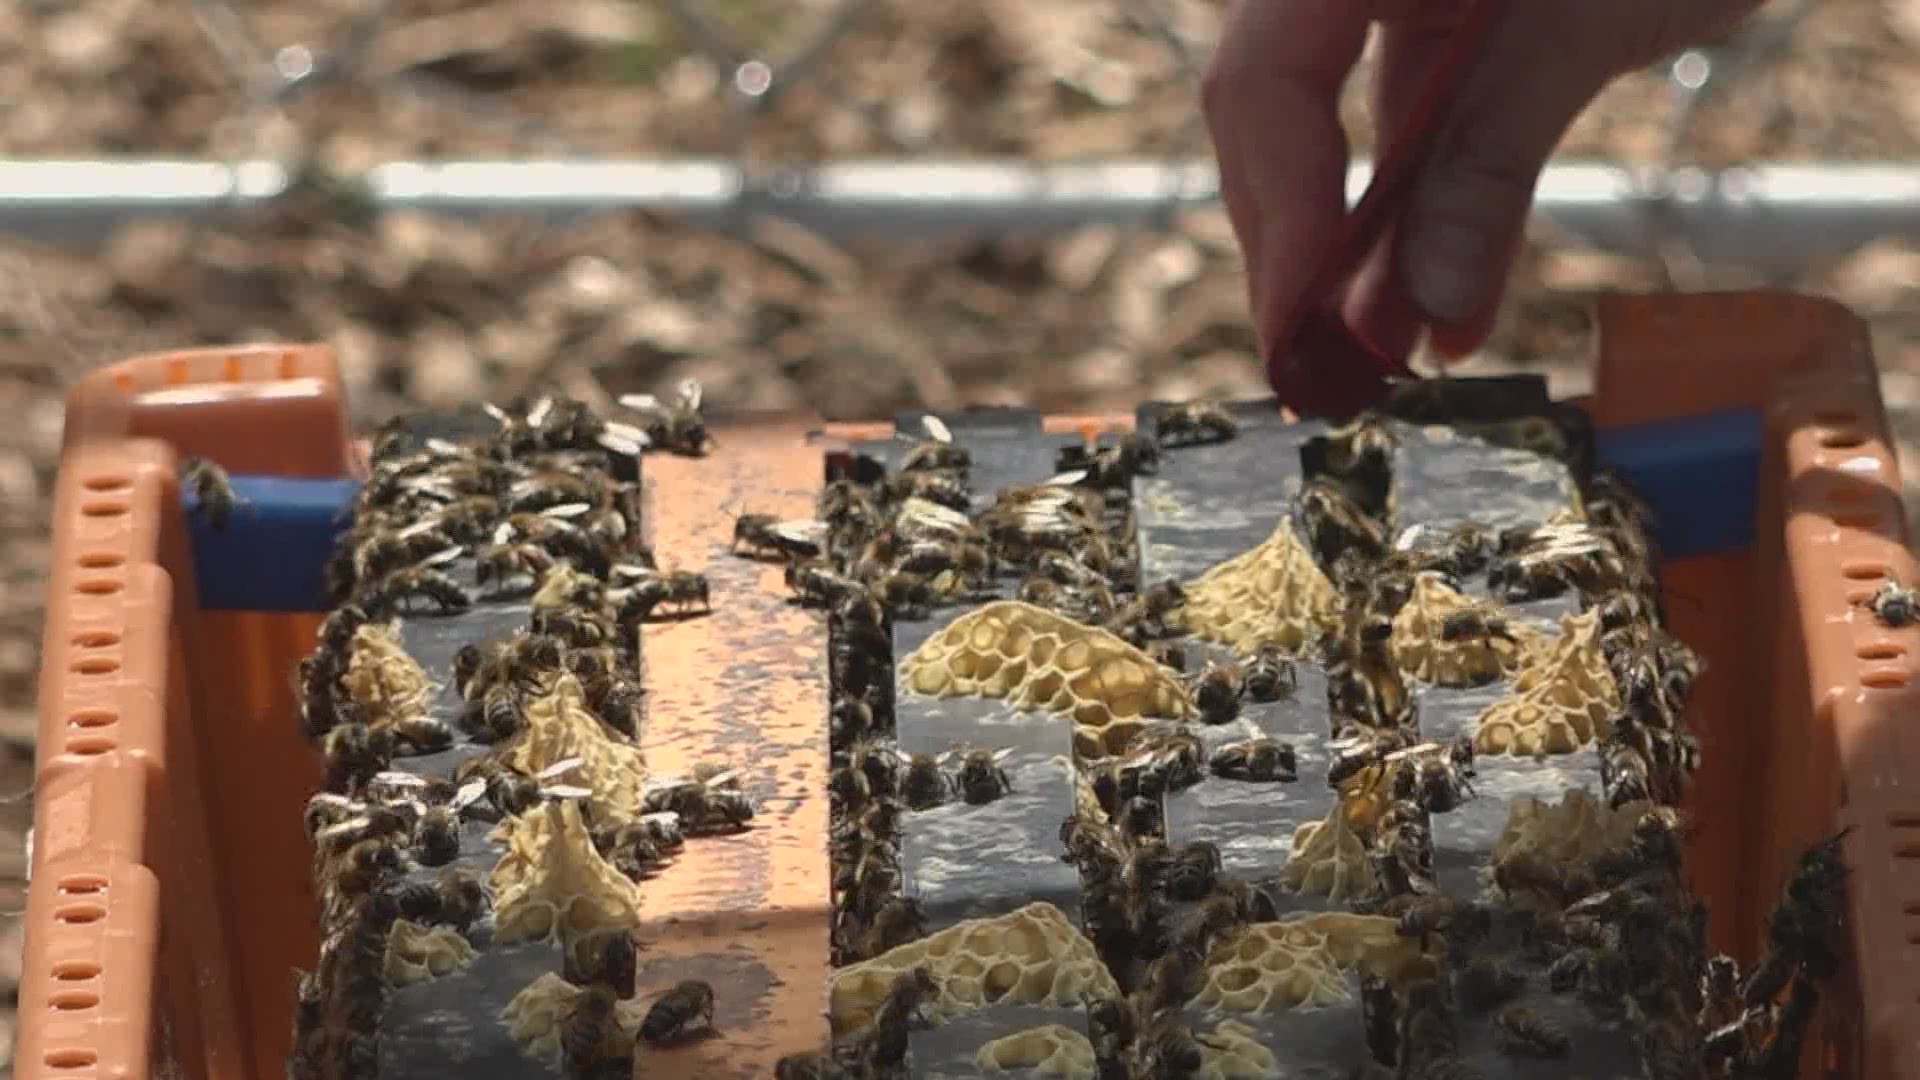 Amidst thousands of bees, the student beekeepers calmly welcomed the bees to their new home